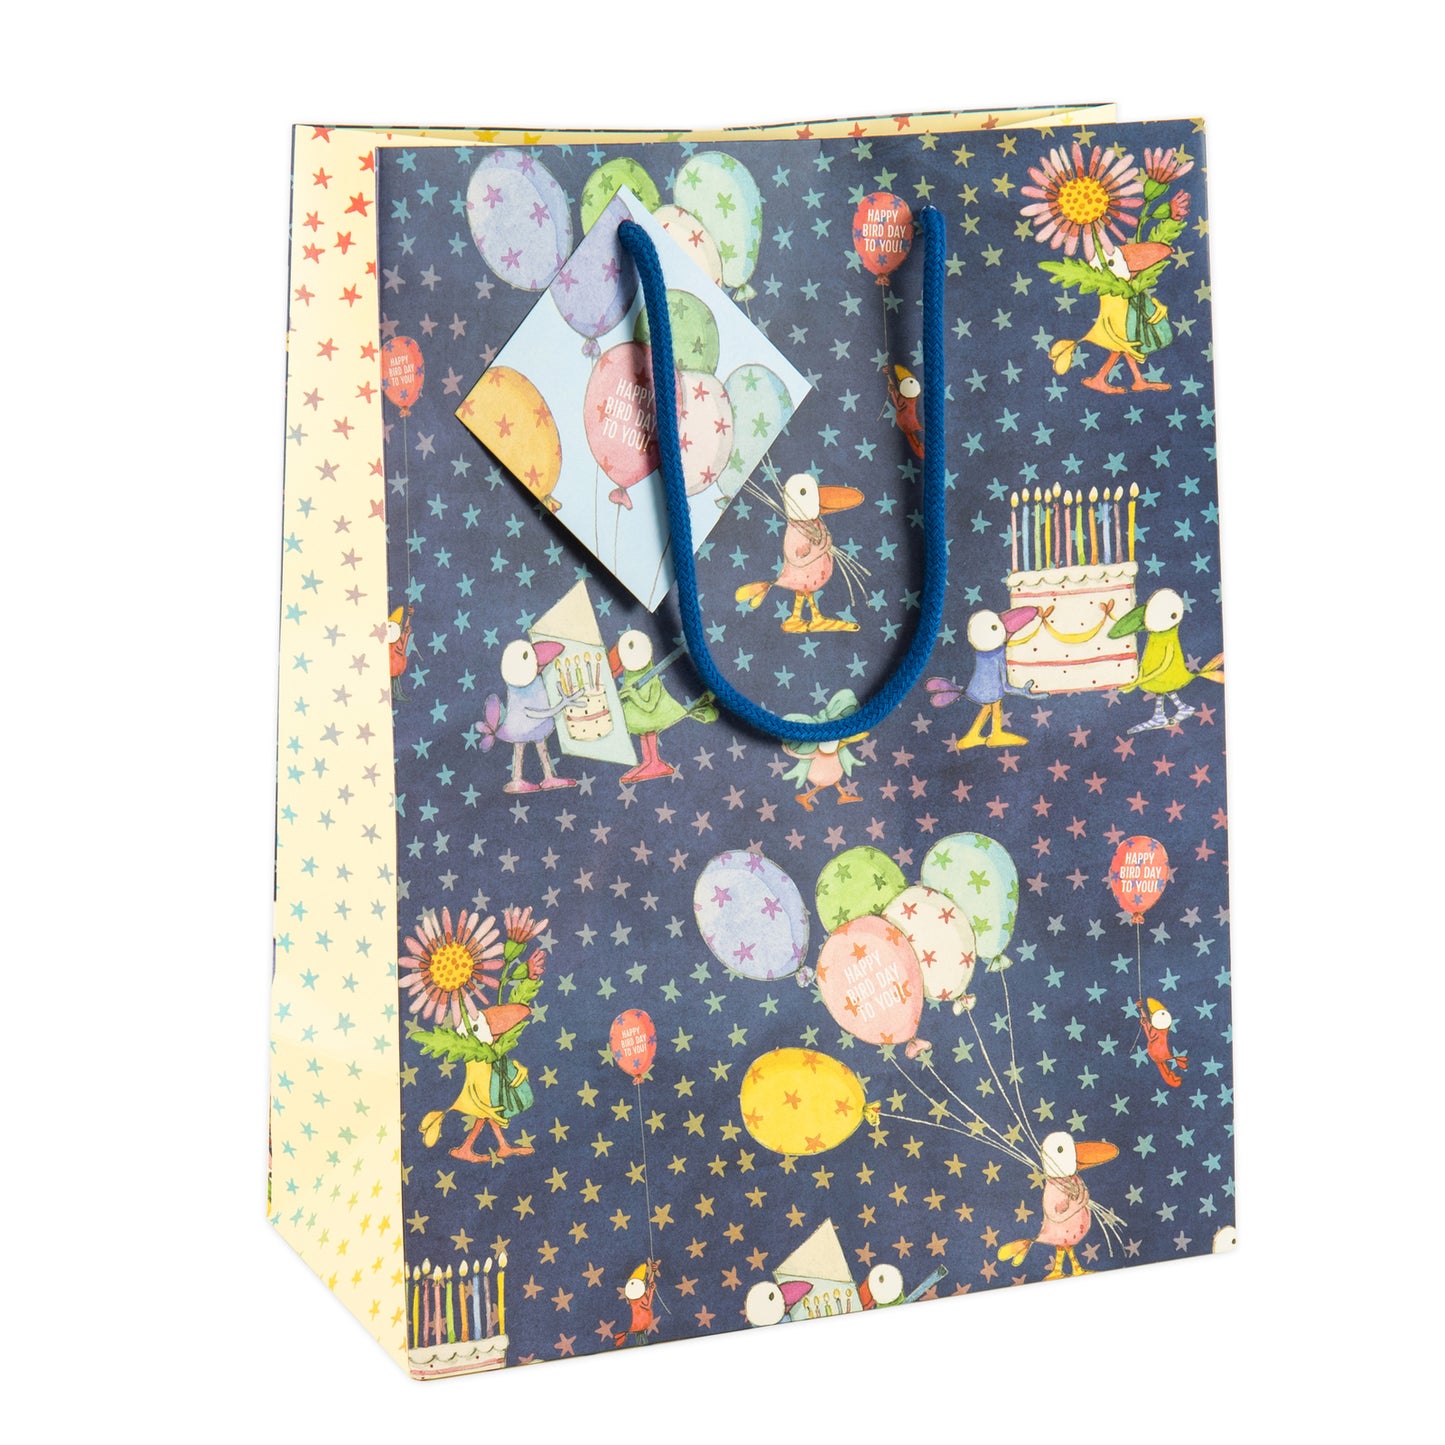 Twigseeds Gift Bag Large - Happy Bird Day Party